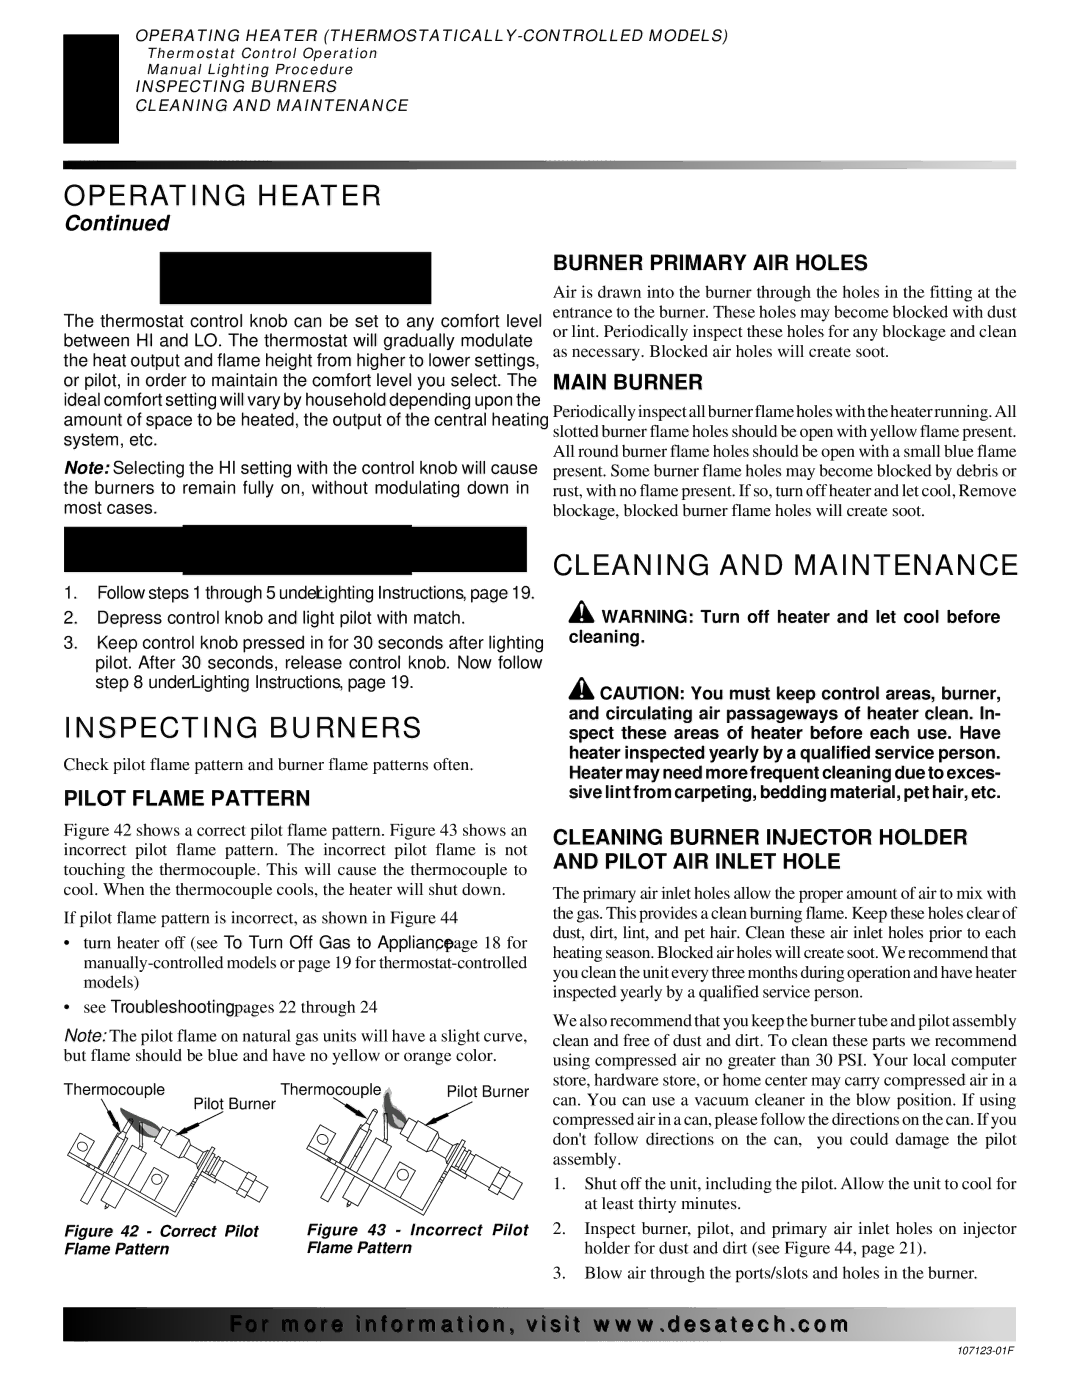 Desa installation manual Inspecting Burners, Cleaning and Maintenance 